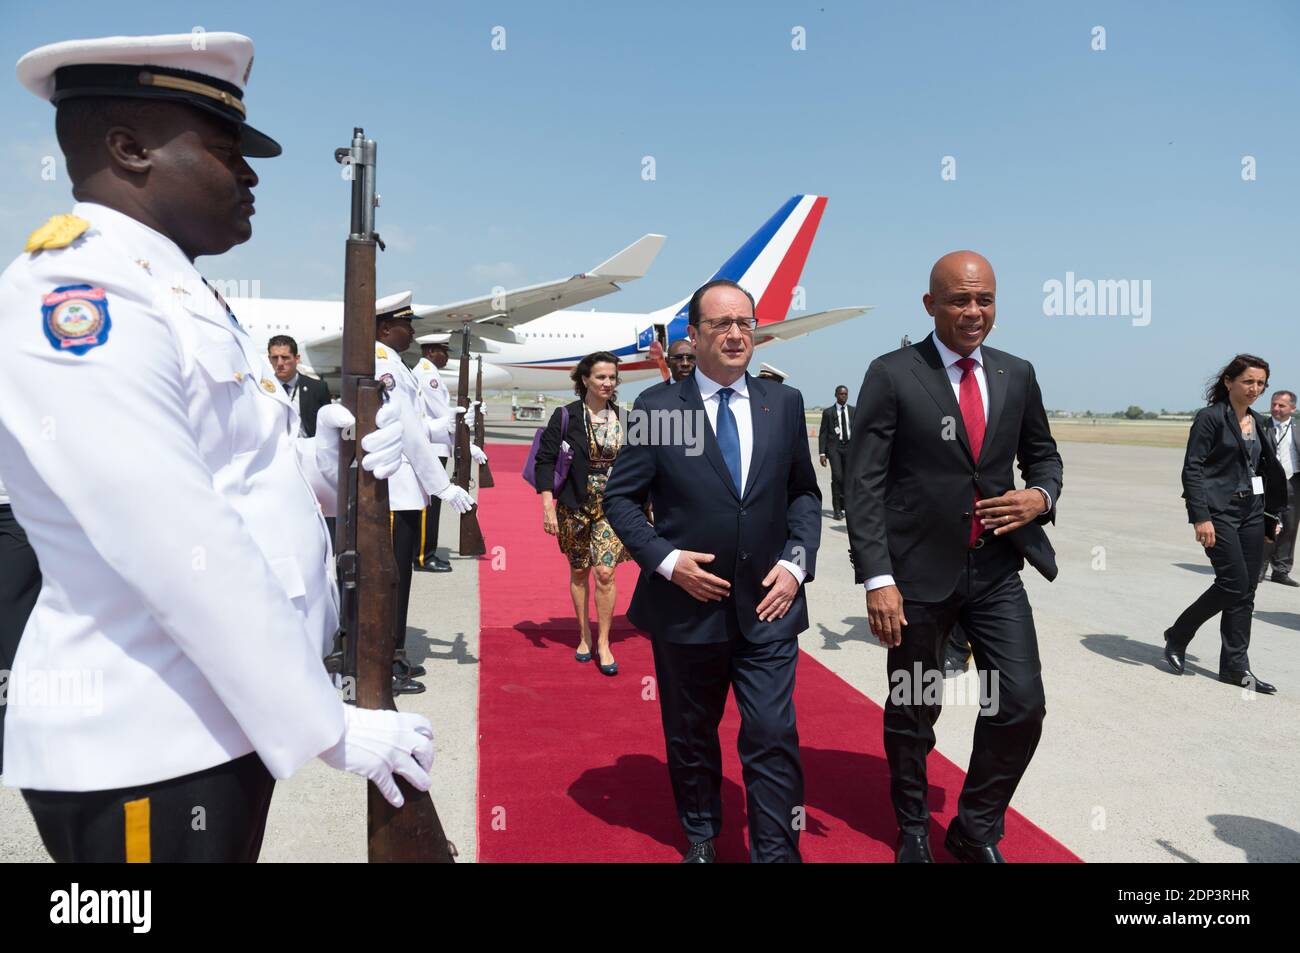 French President Francois Hollande is welcomed by his Haitian counterpart Michel Joseph Martelly as he arrives to Toussaint Louverture international airport in Port-au-Prince, Haiti on May 12, 2015. Hollande is on a five-day tour to the Caribbean including Guadeloupe, Martinique, Cuba and Haiti. Photo by Jacques Witt/Pool/ABACAPRESS.COM Stock Photo